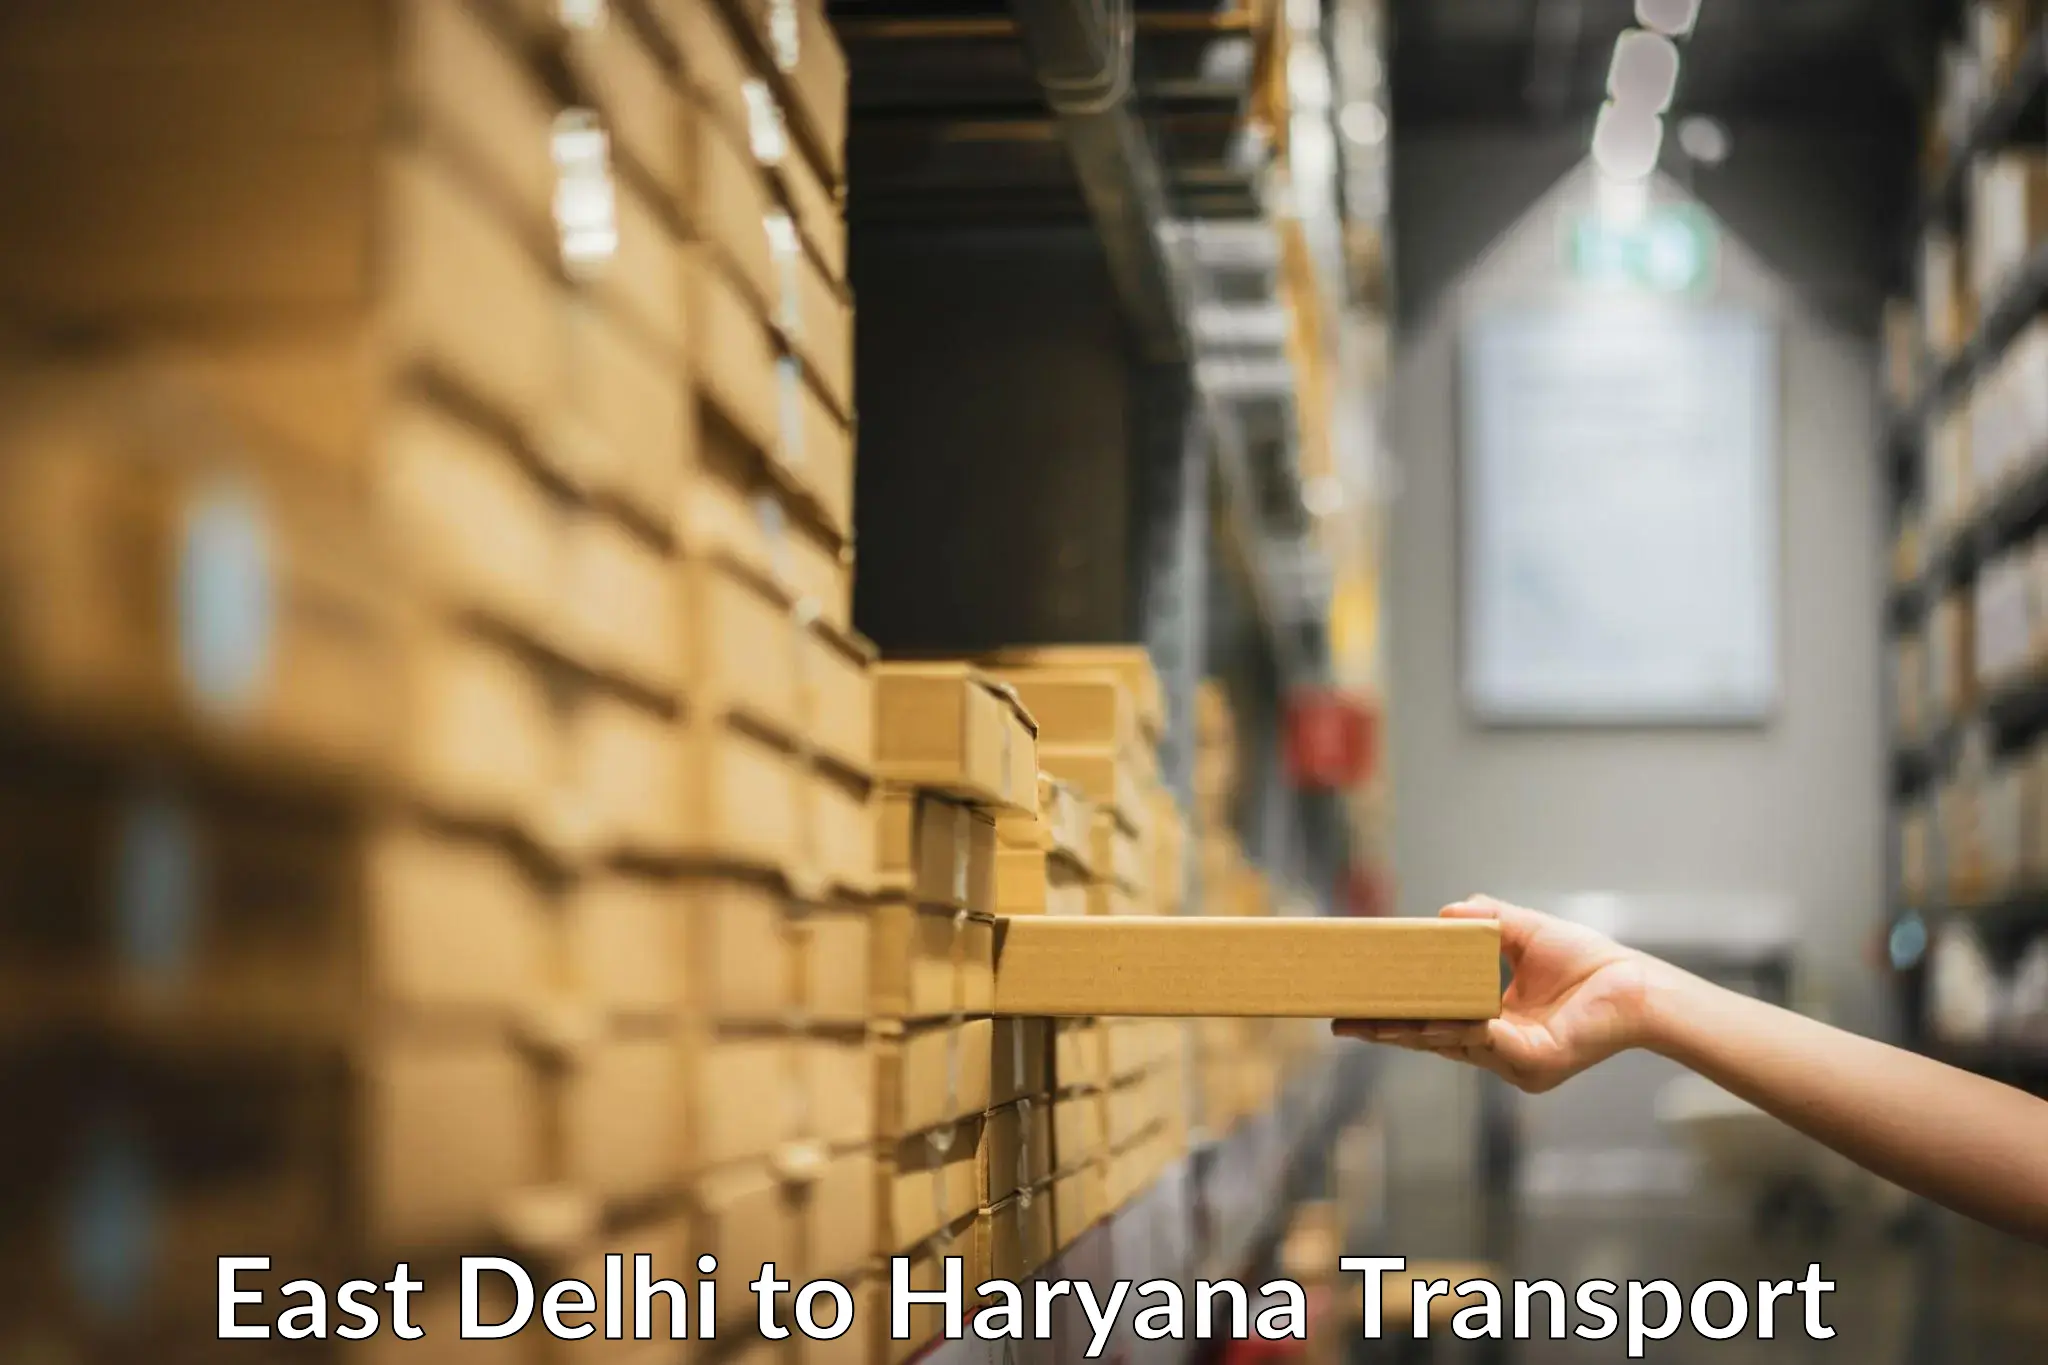 Delivery service East Delhi to Haryana